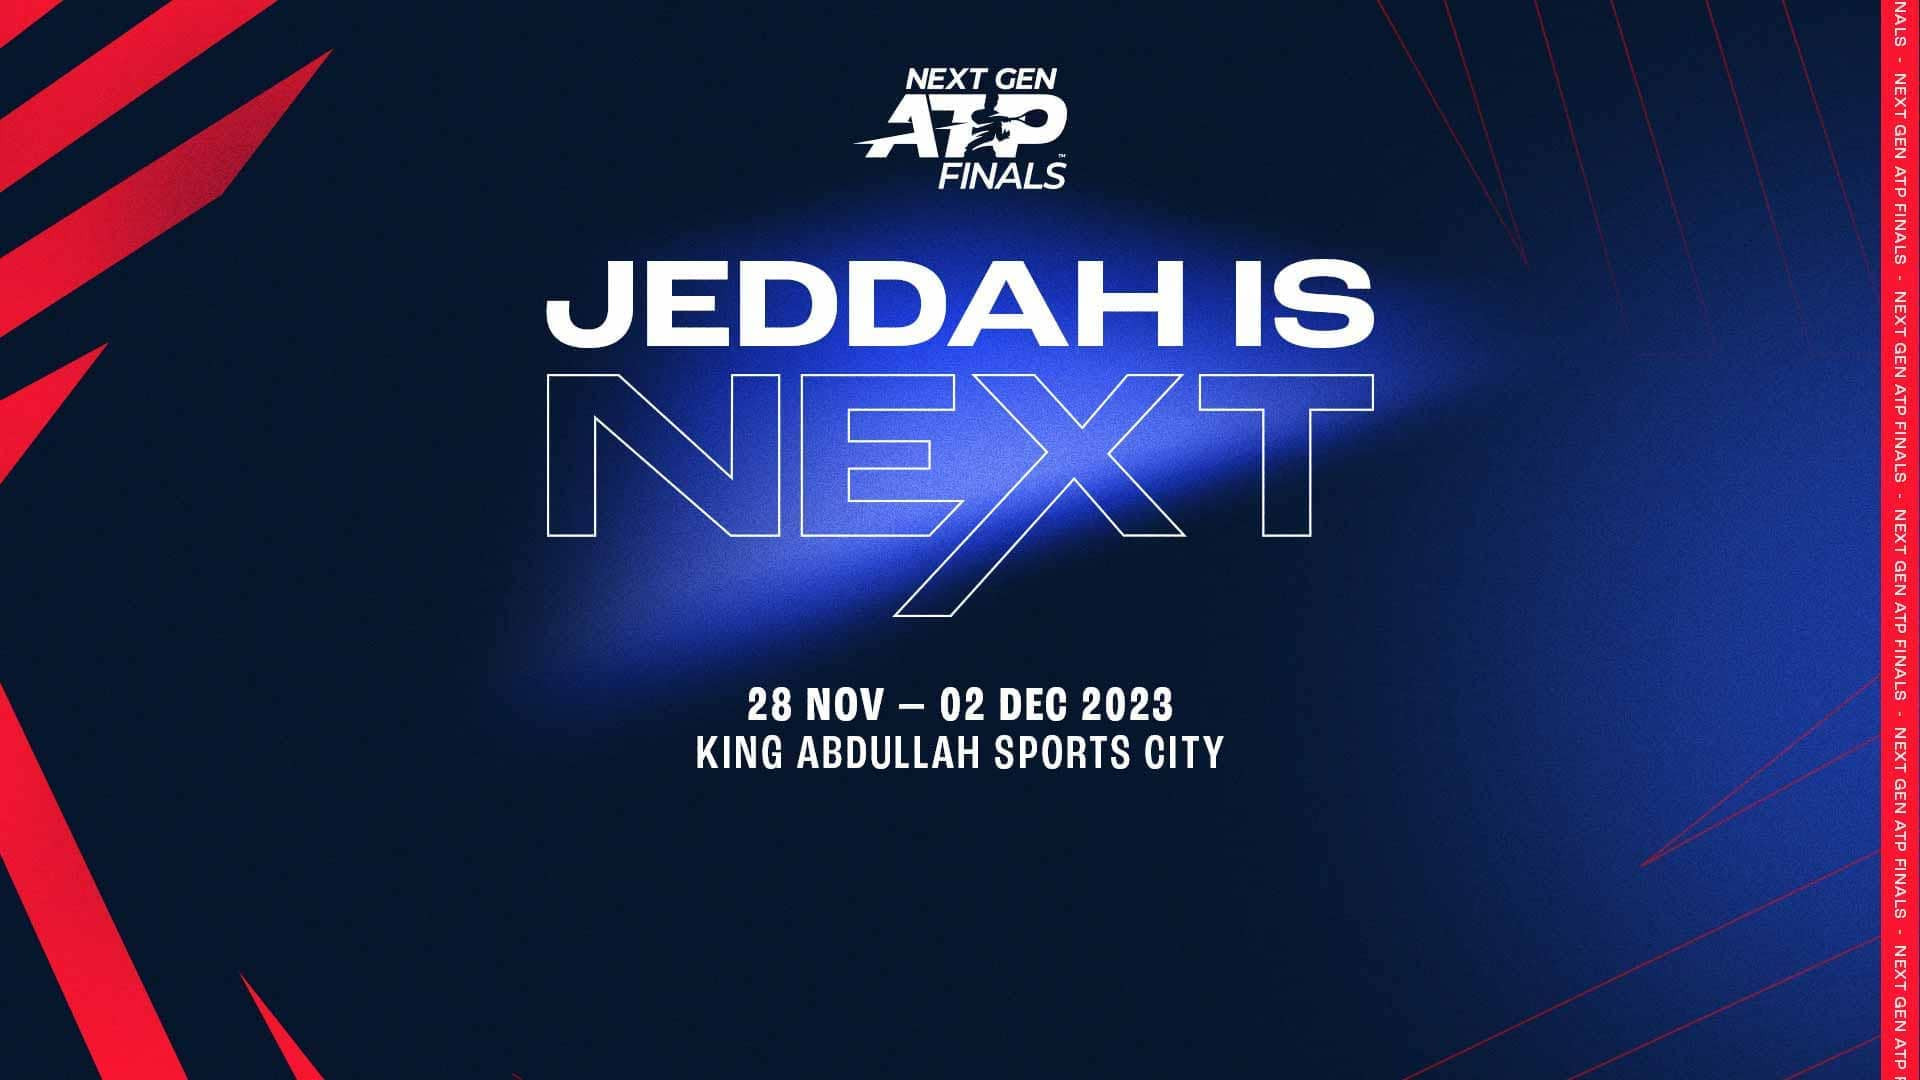 Jeddah to Host Next Gen ATP Finals 2023 with Record Prize Purse of $15 Million